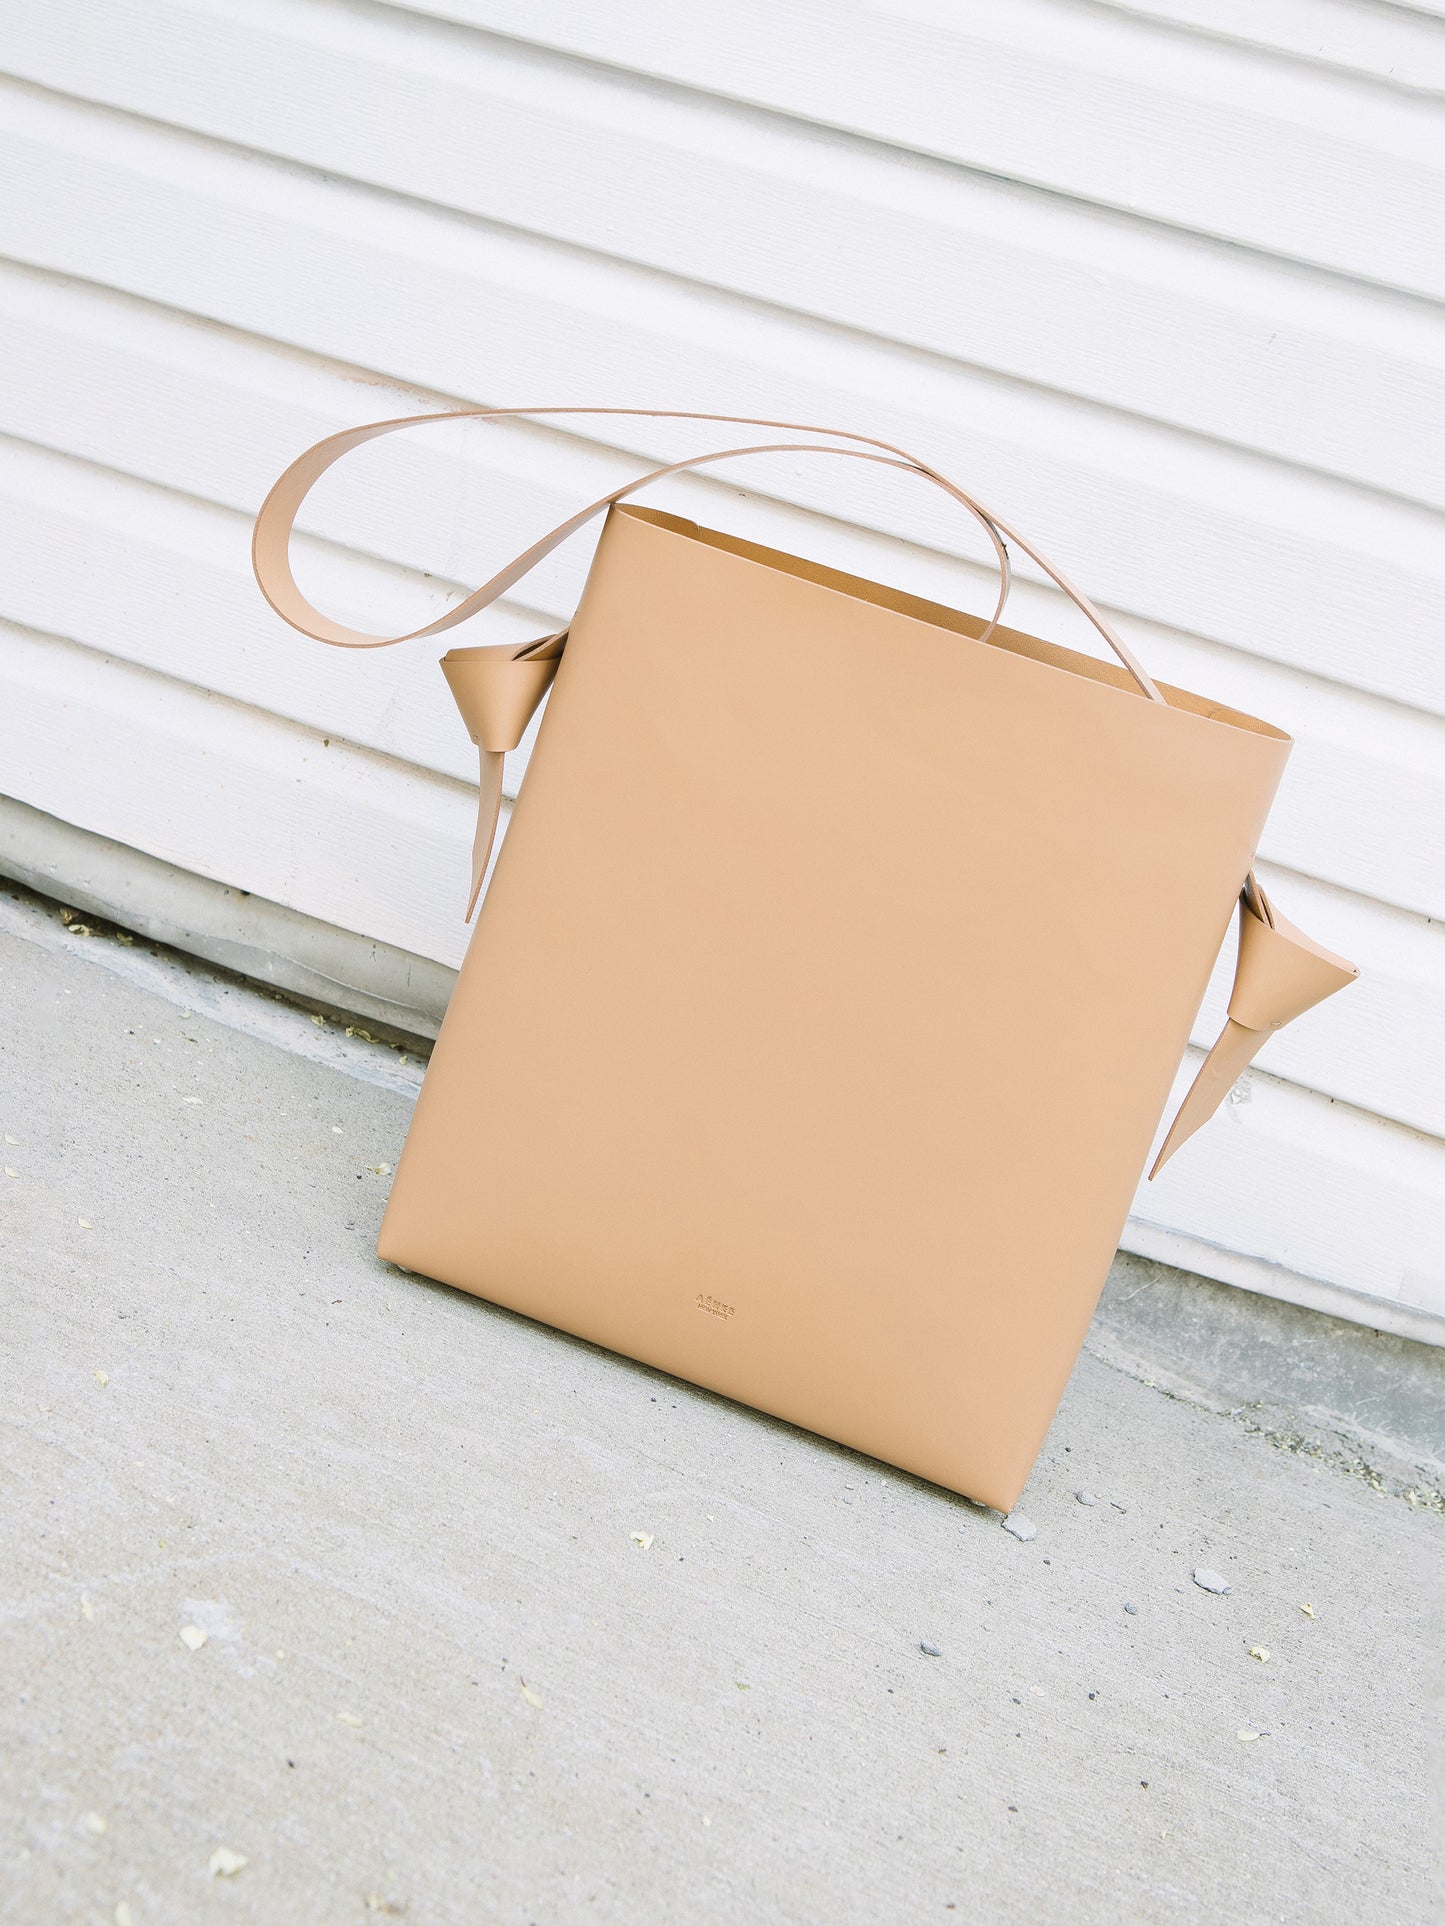 Chic beige tote and bucket bag crafted from Italian vegetable tanned leather for a minimal yet sophisticated look.